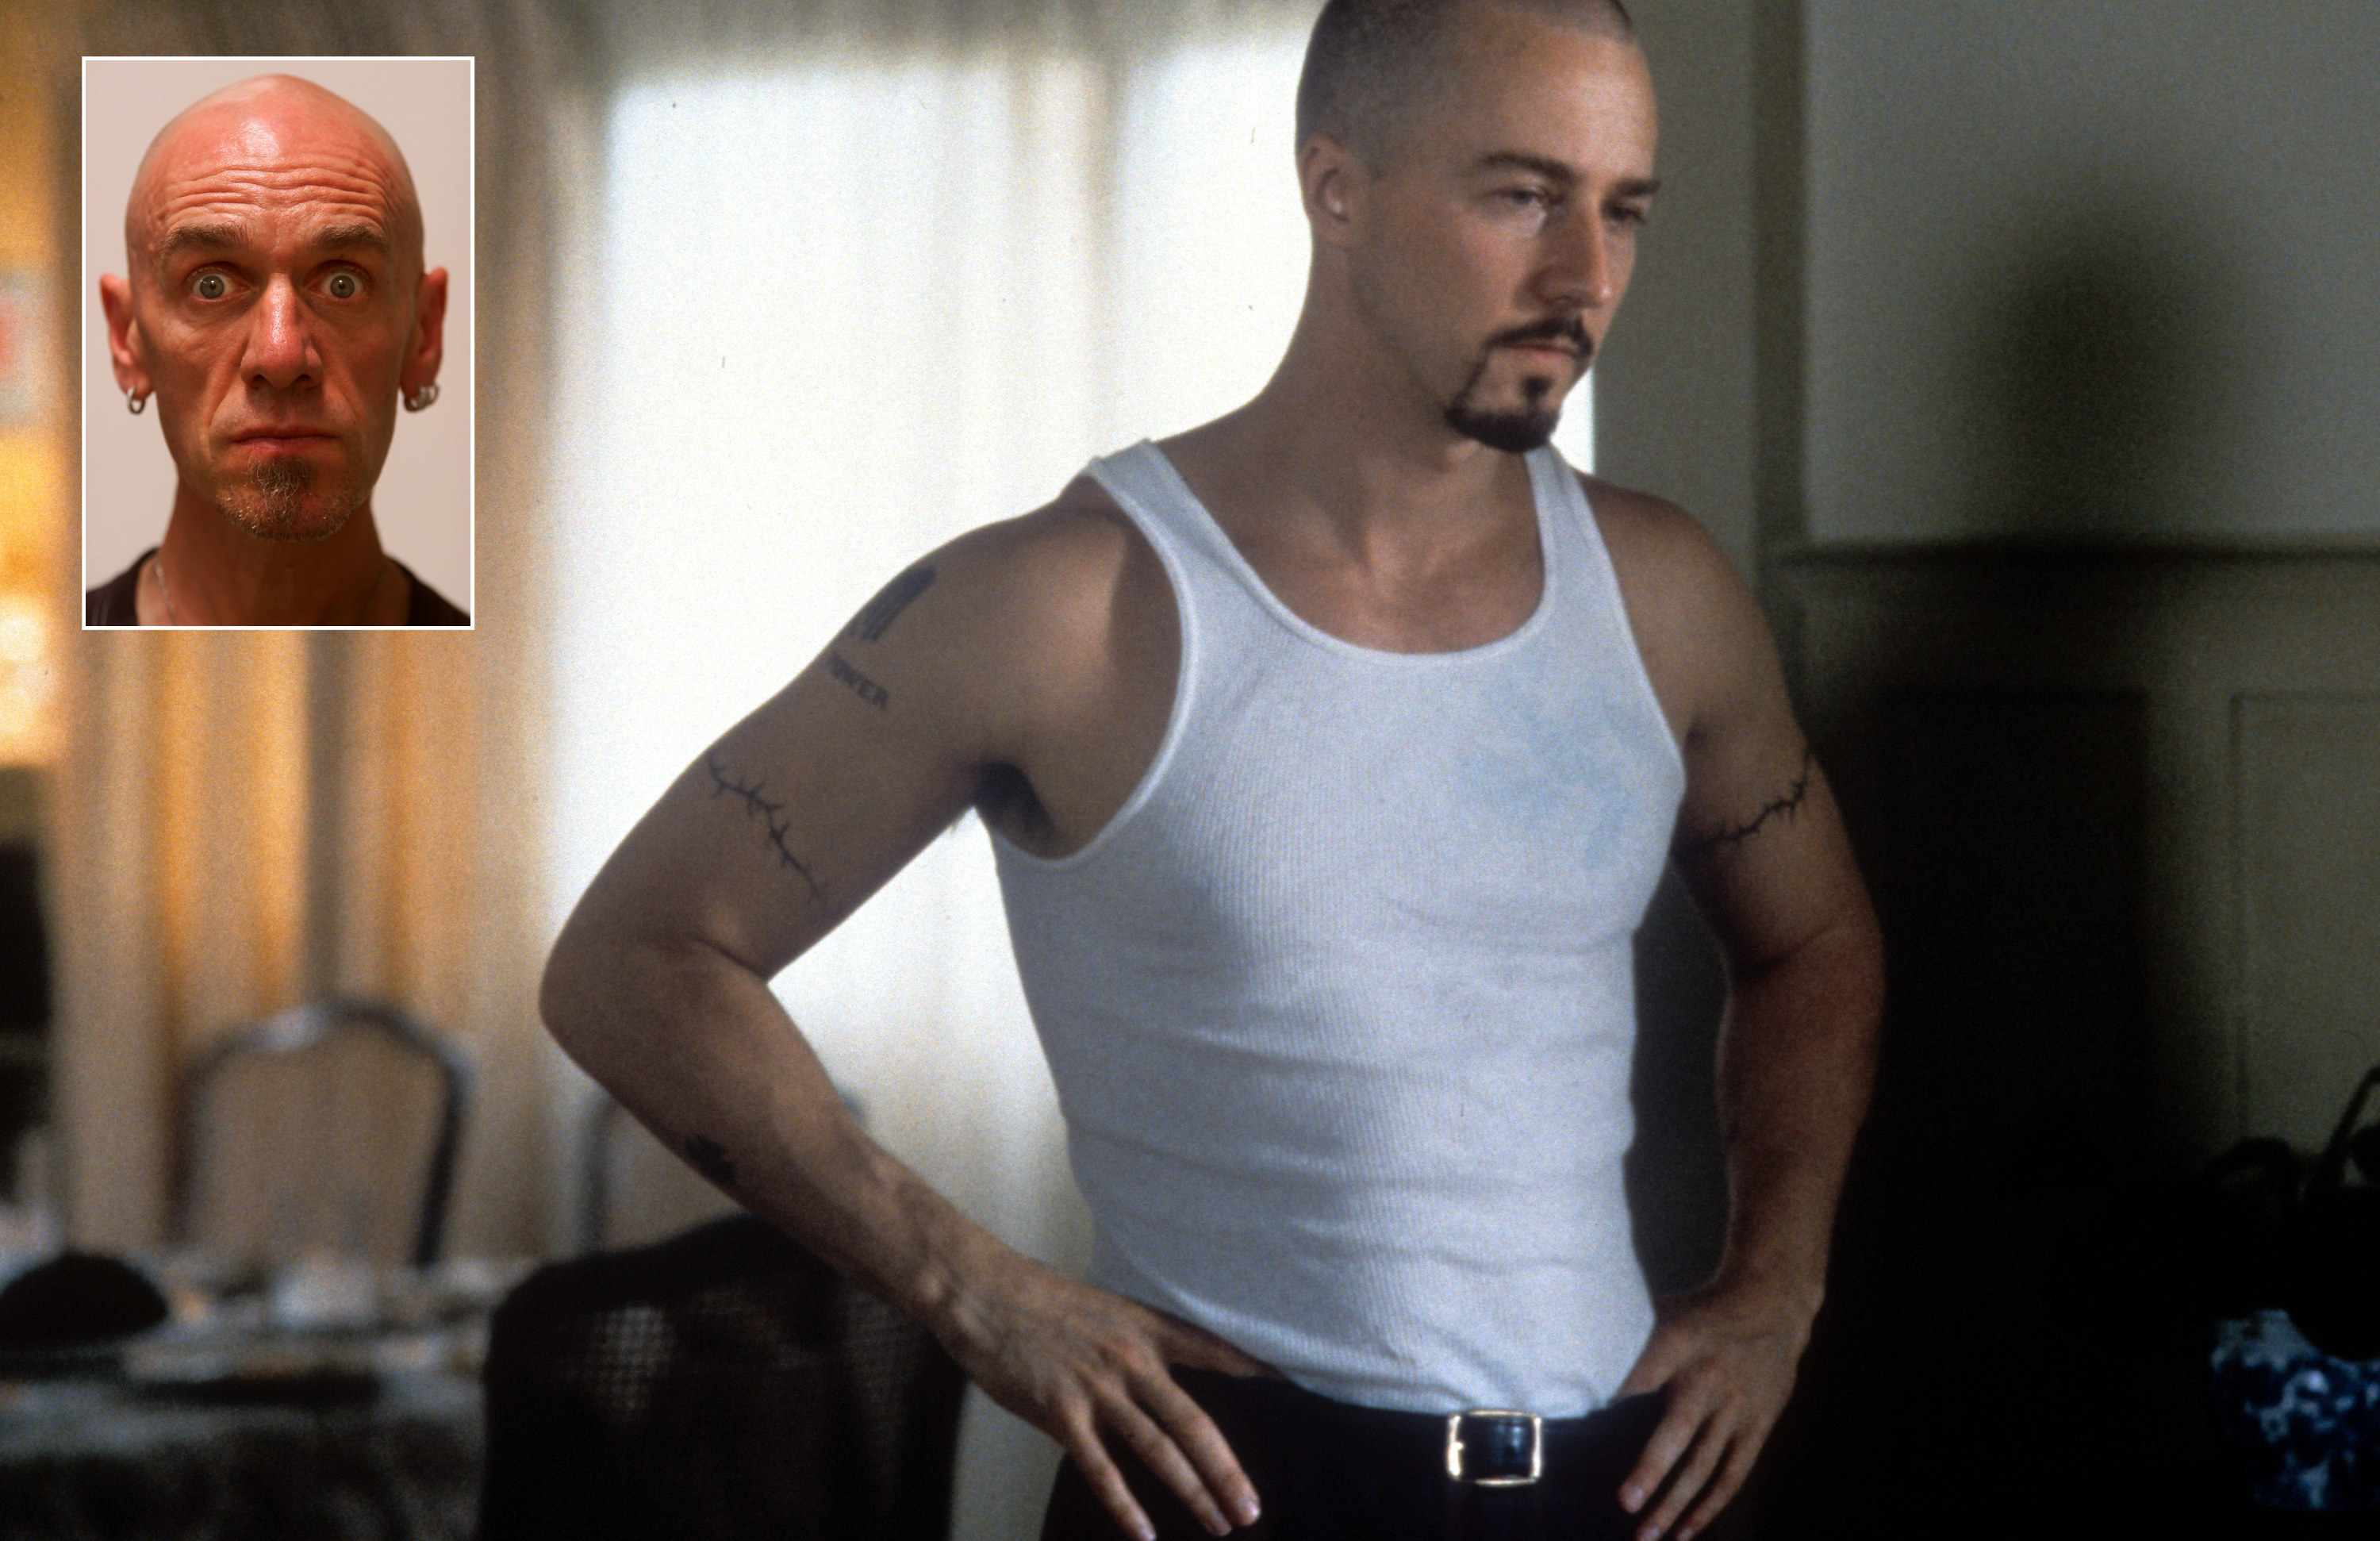 Edward Norton with hands at waist in a scene from the film &#x27;&quot;American History X&quot; and the other photo is of Tony Kaye in his West Los Angeles studio